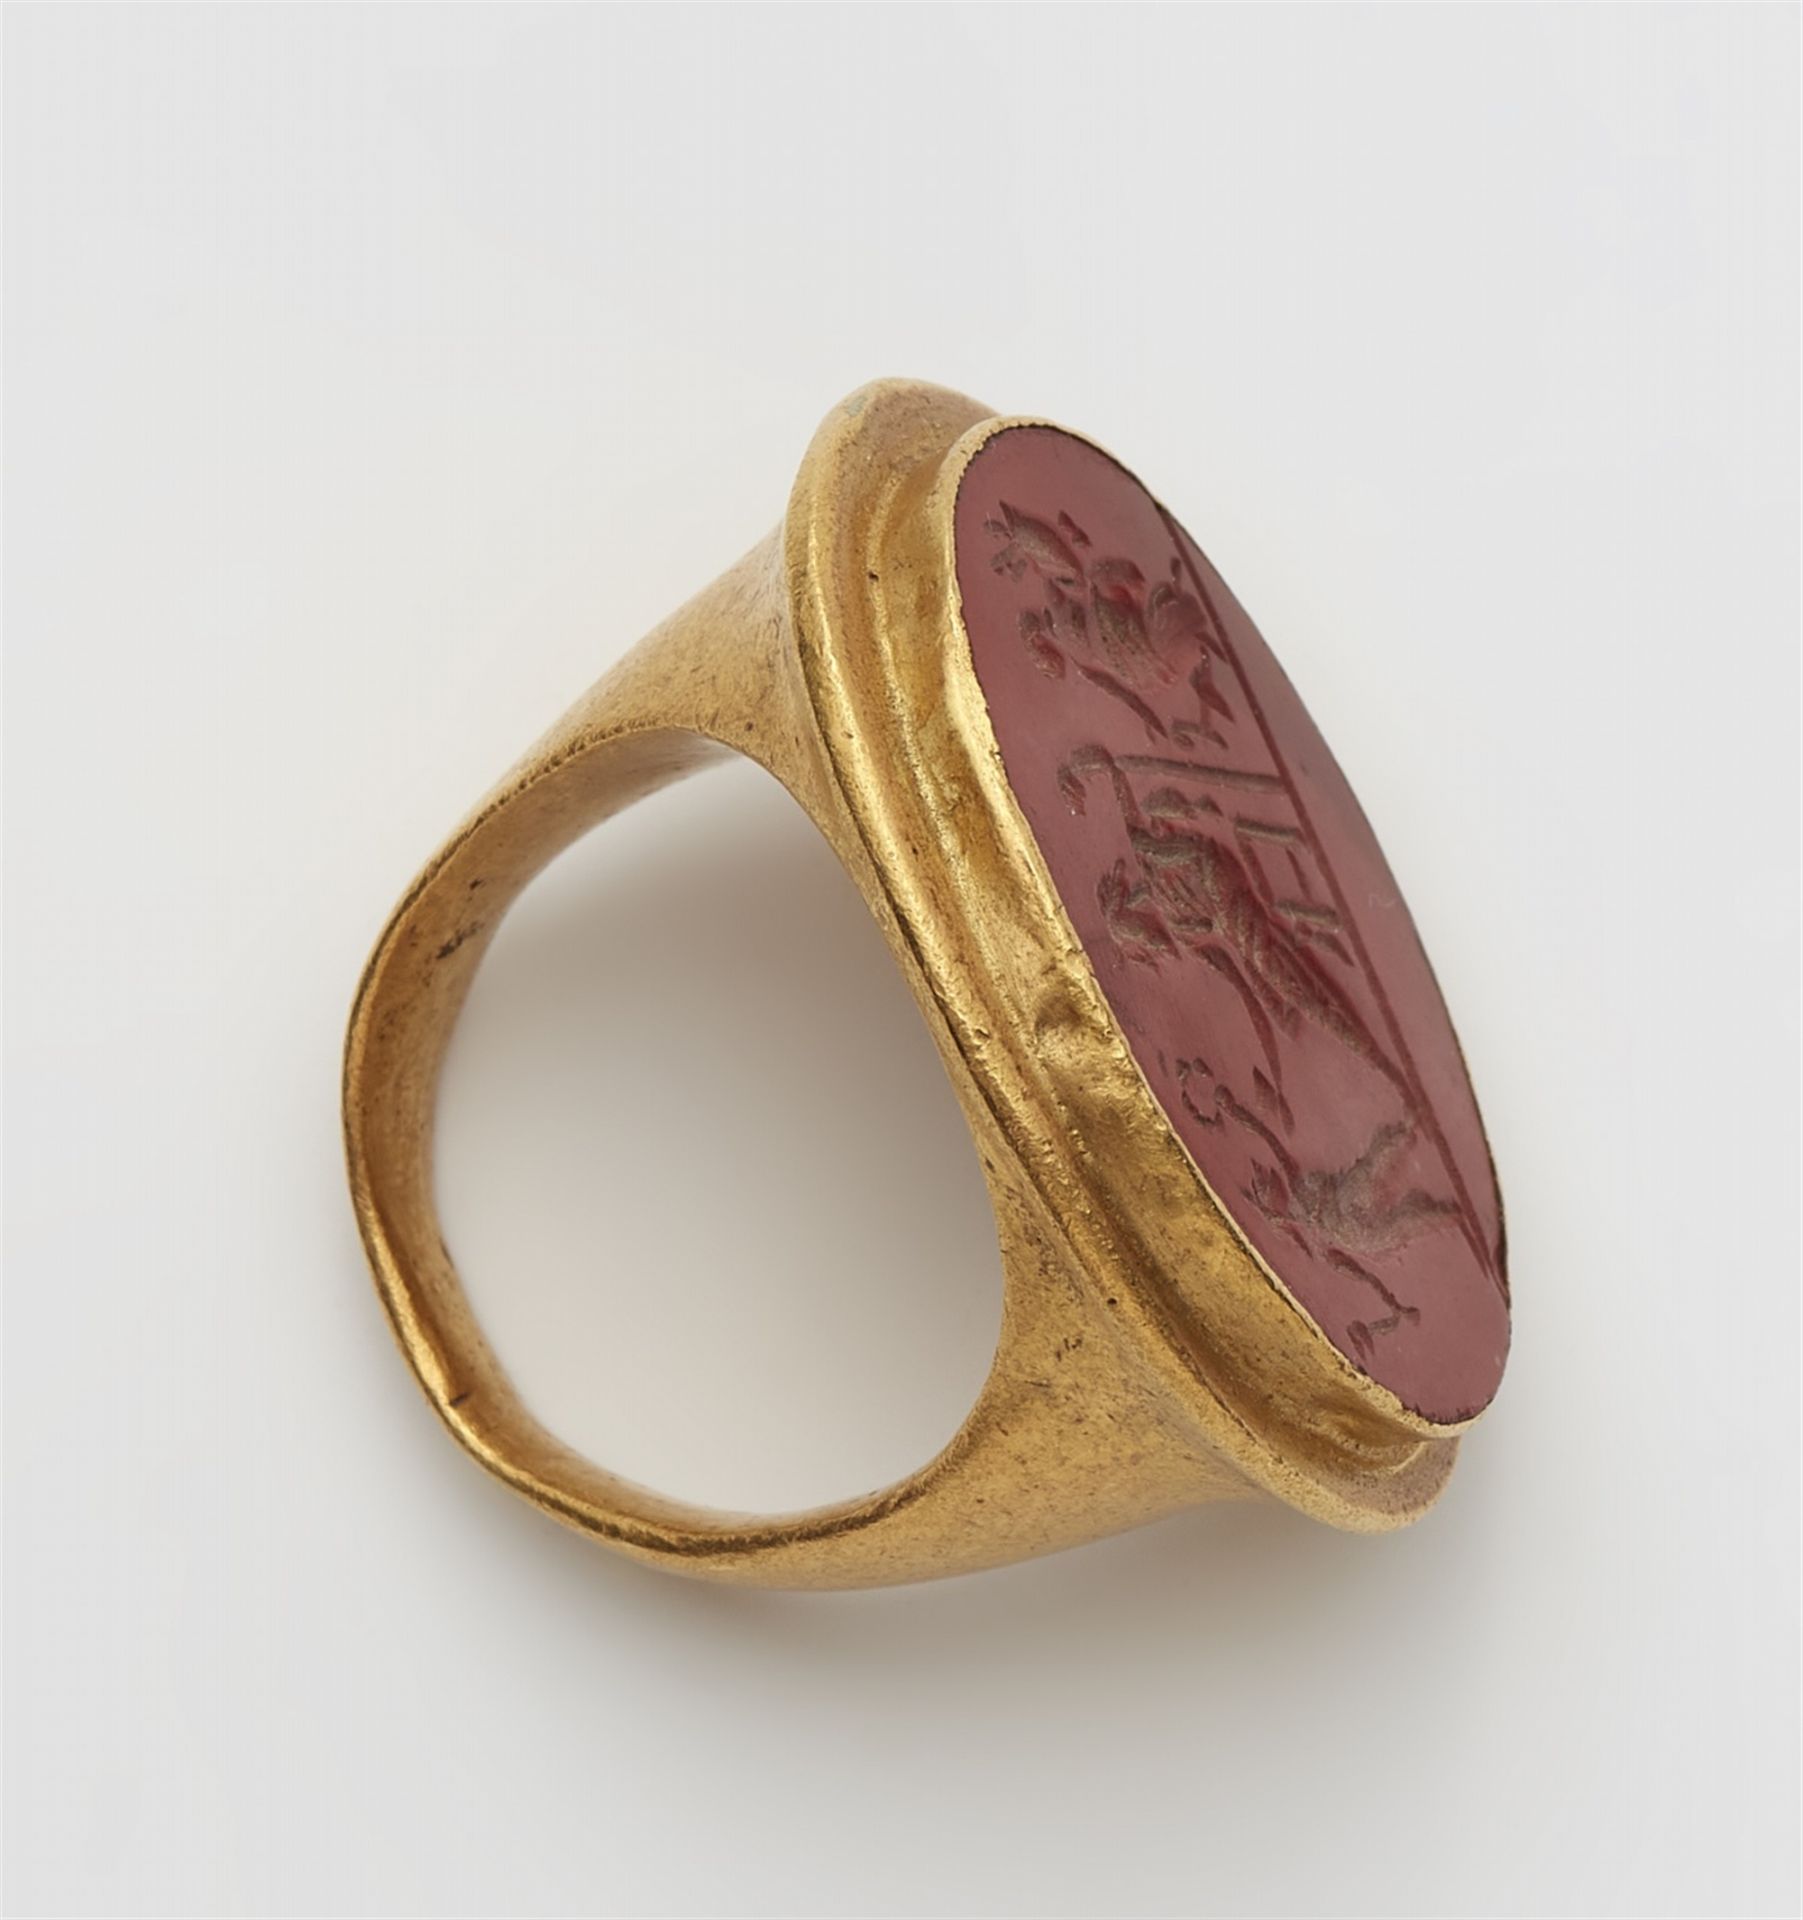 A 22k gold ring with a Roman intaglio - Image 3 of 3